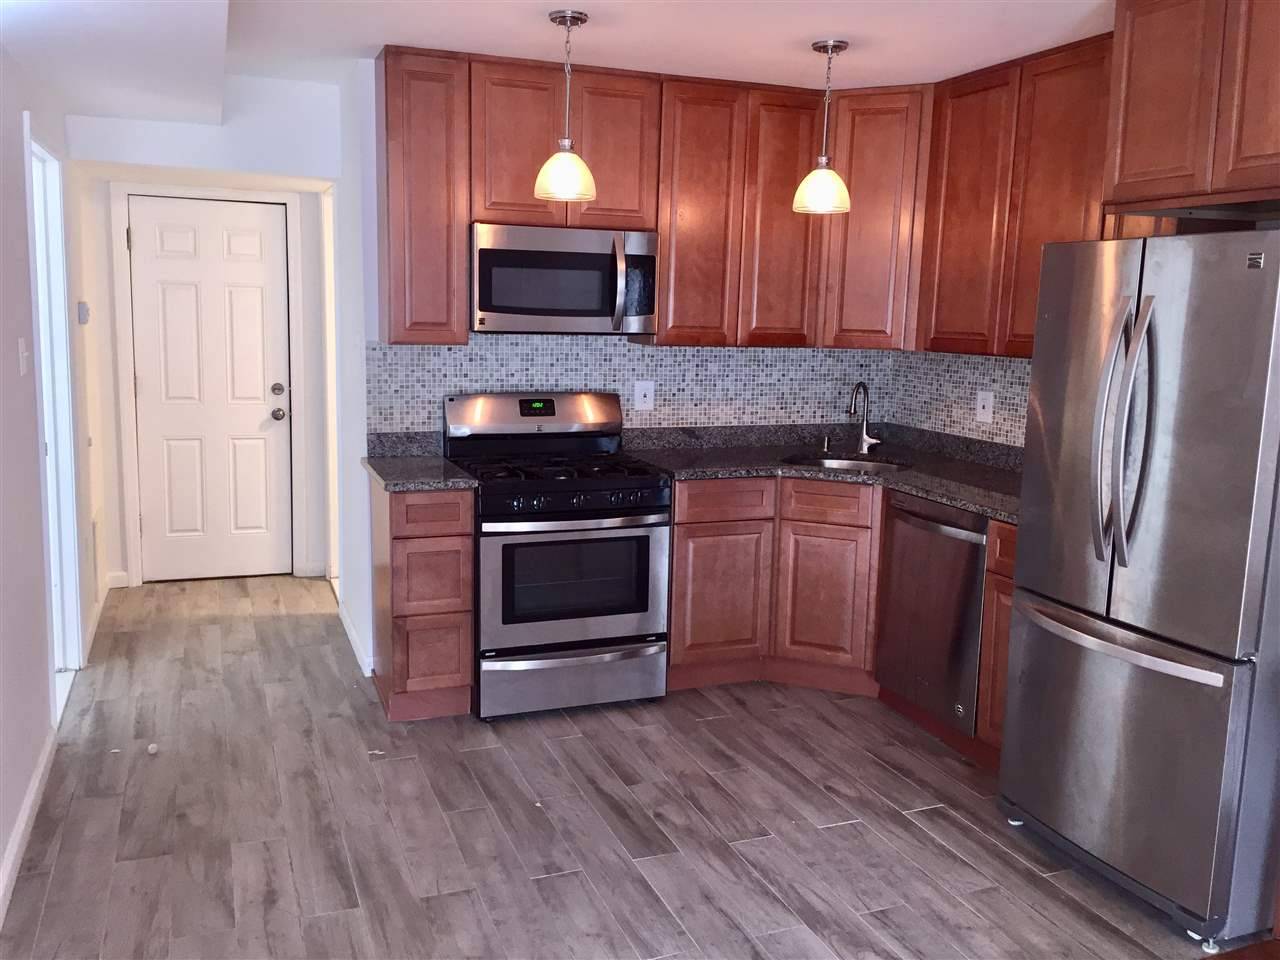 2 bedroom 1 bath Duplex is available in Prime Downtown Jersey City Location